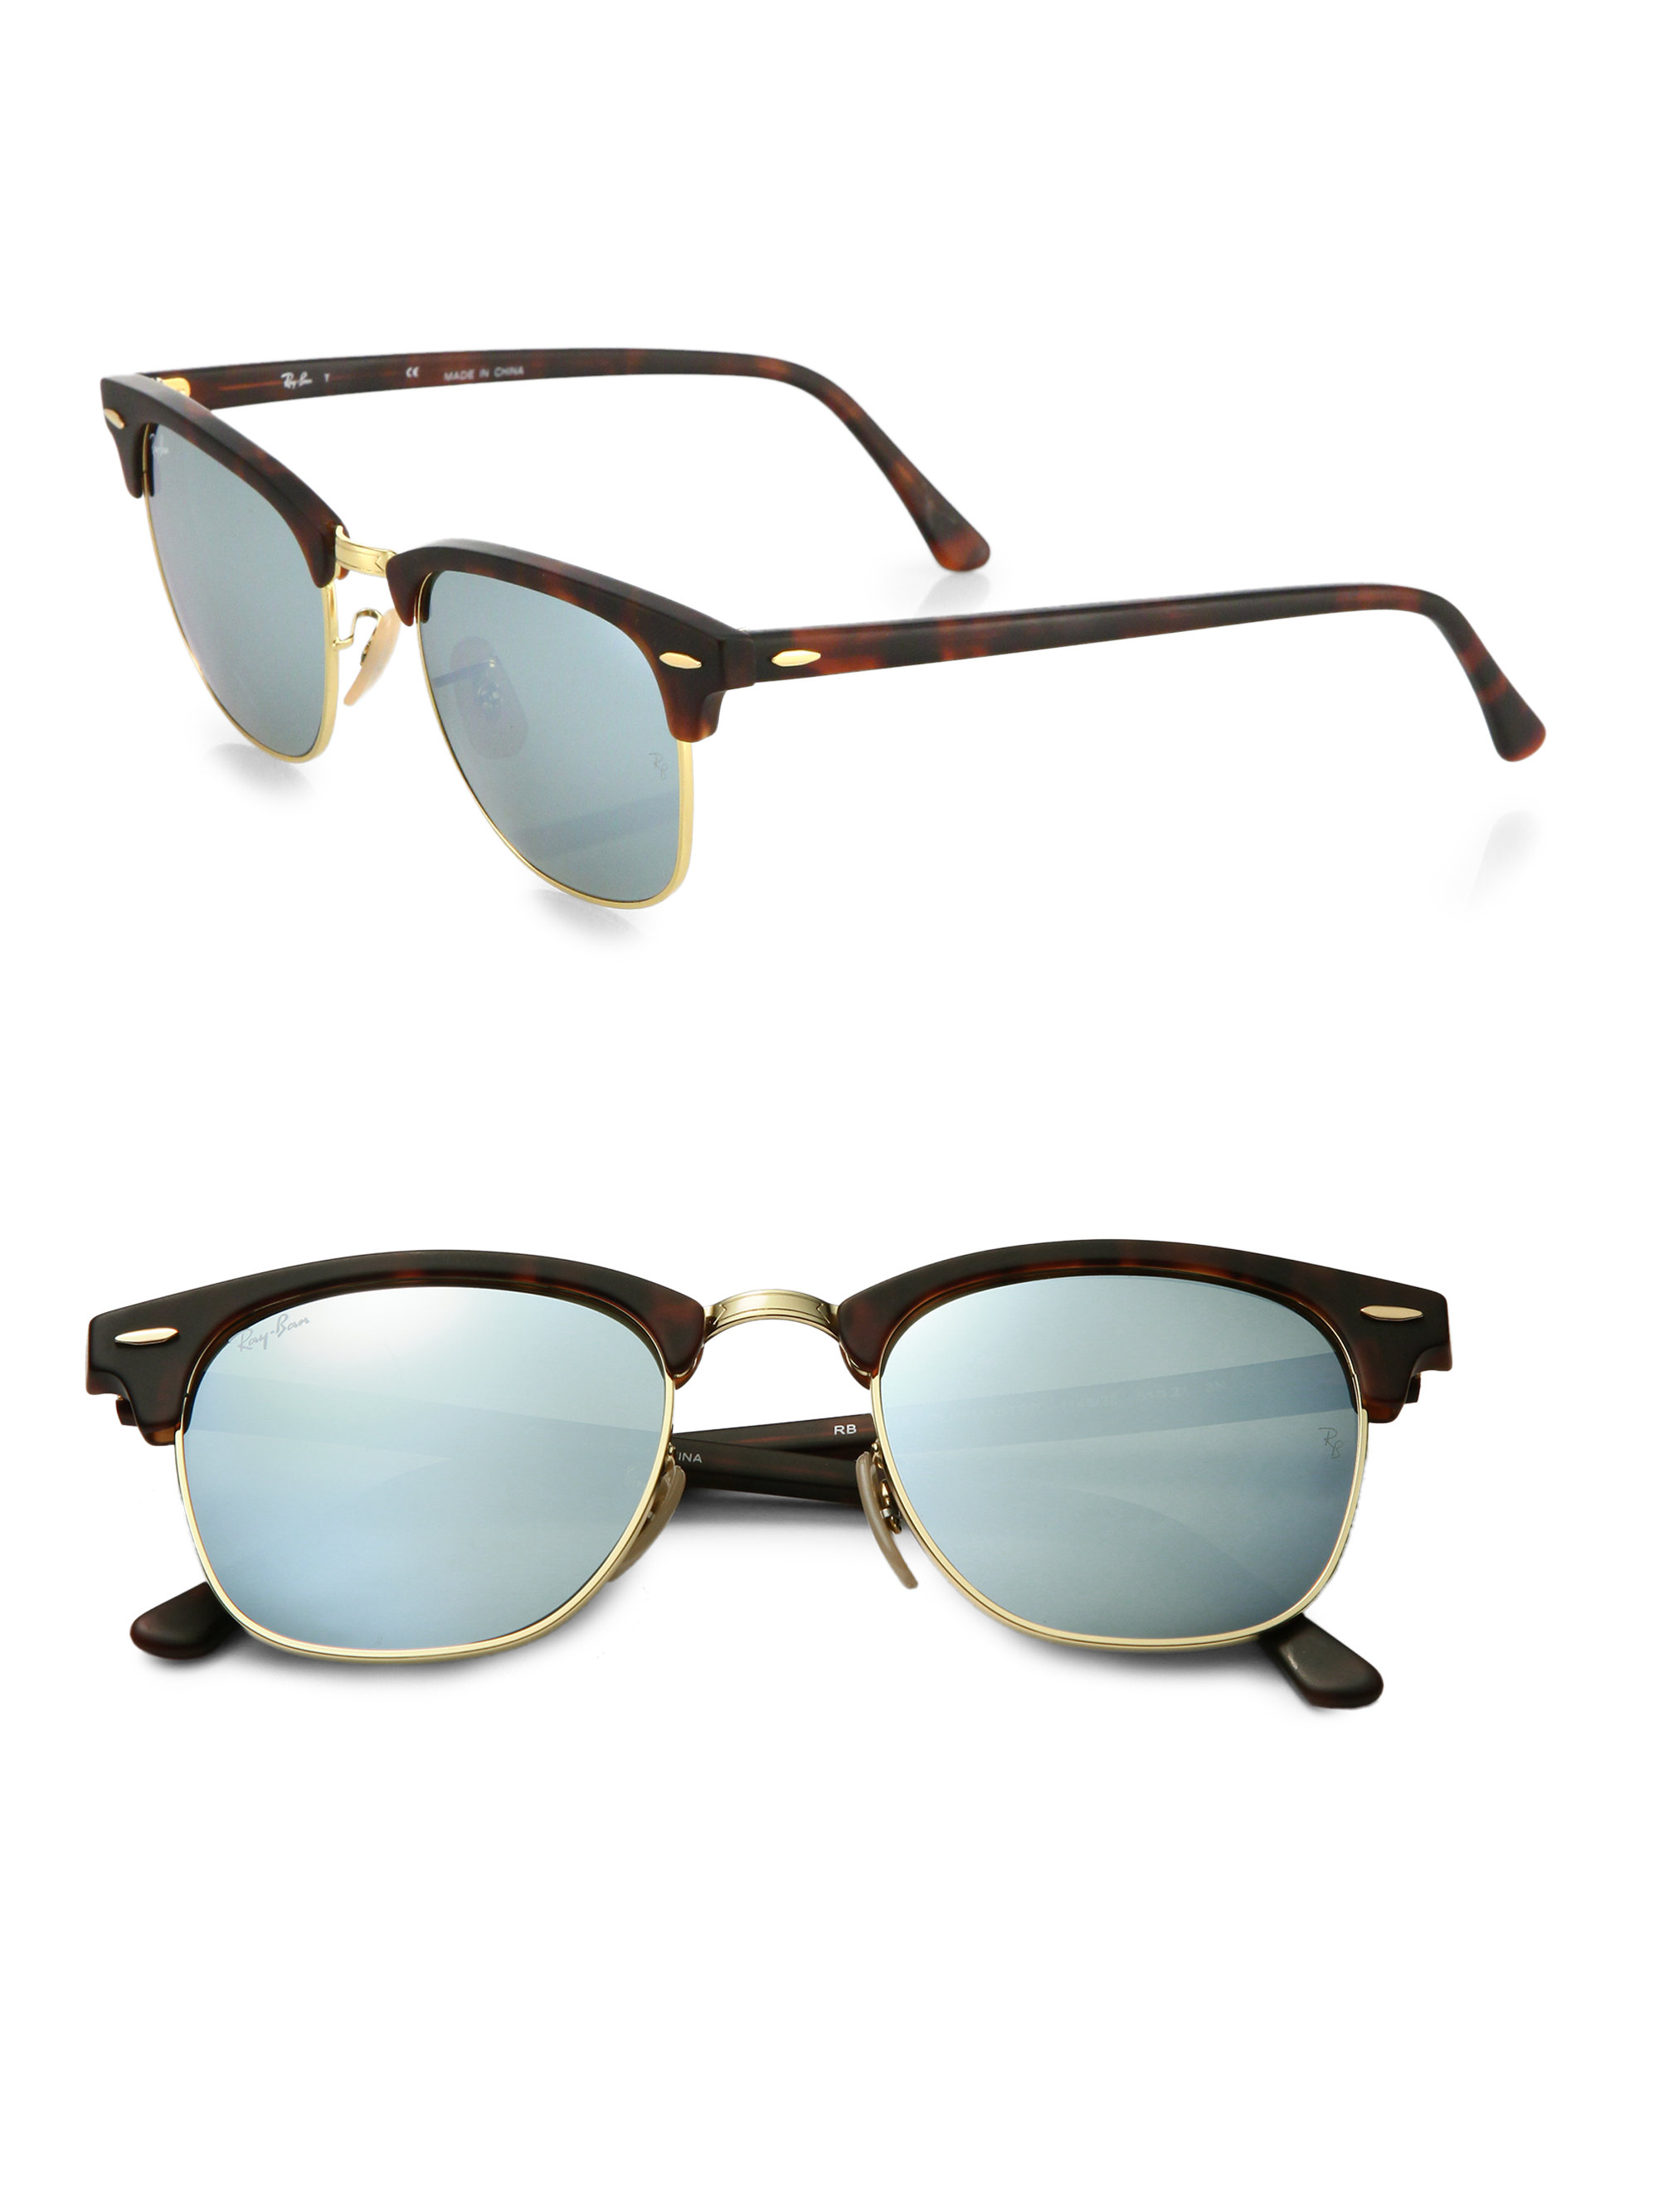 2019 most ray ban sunglasses sale cheap online 2019